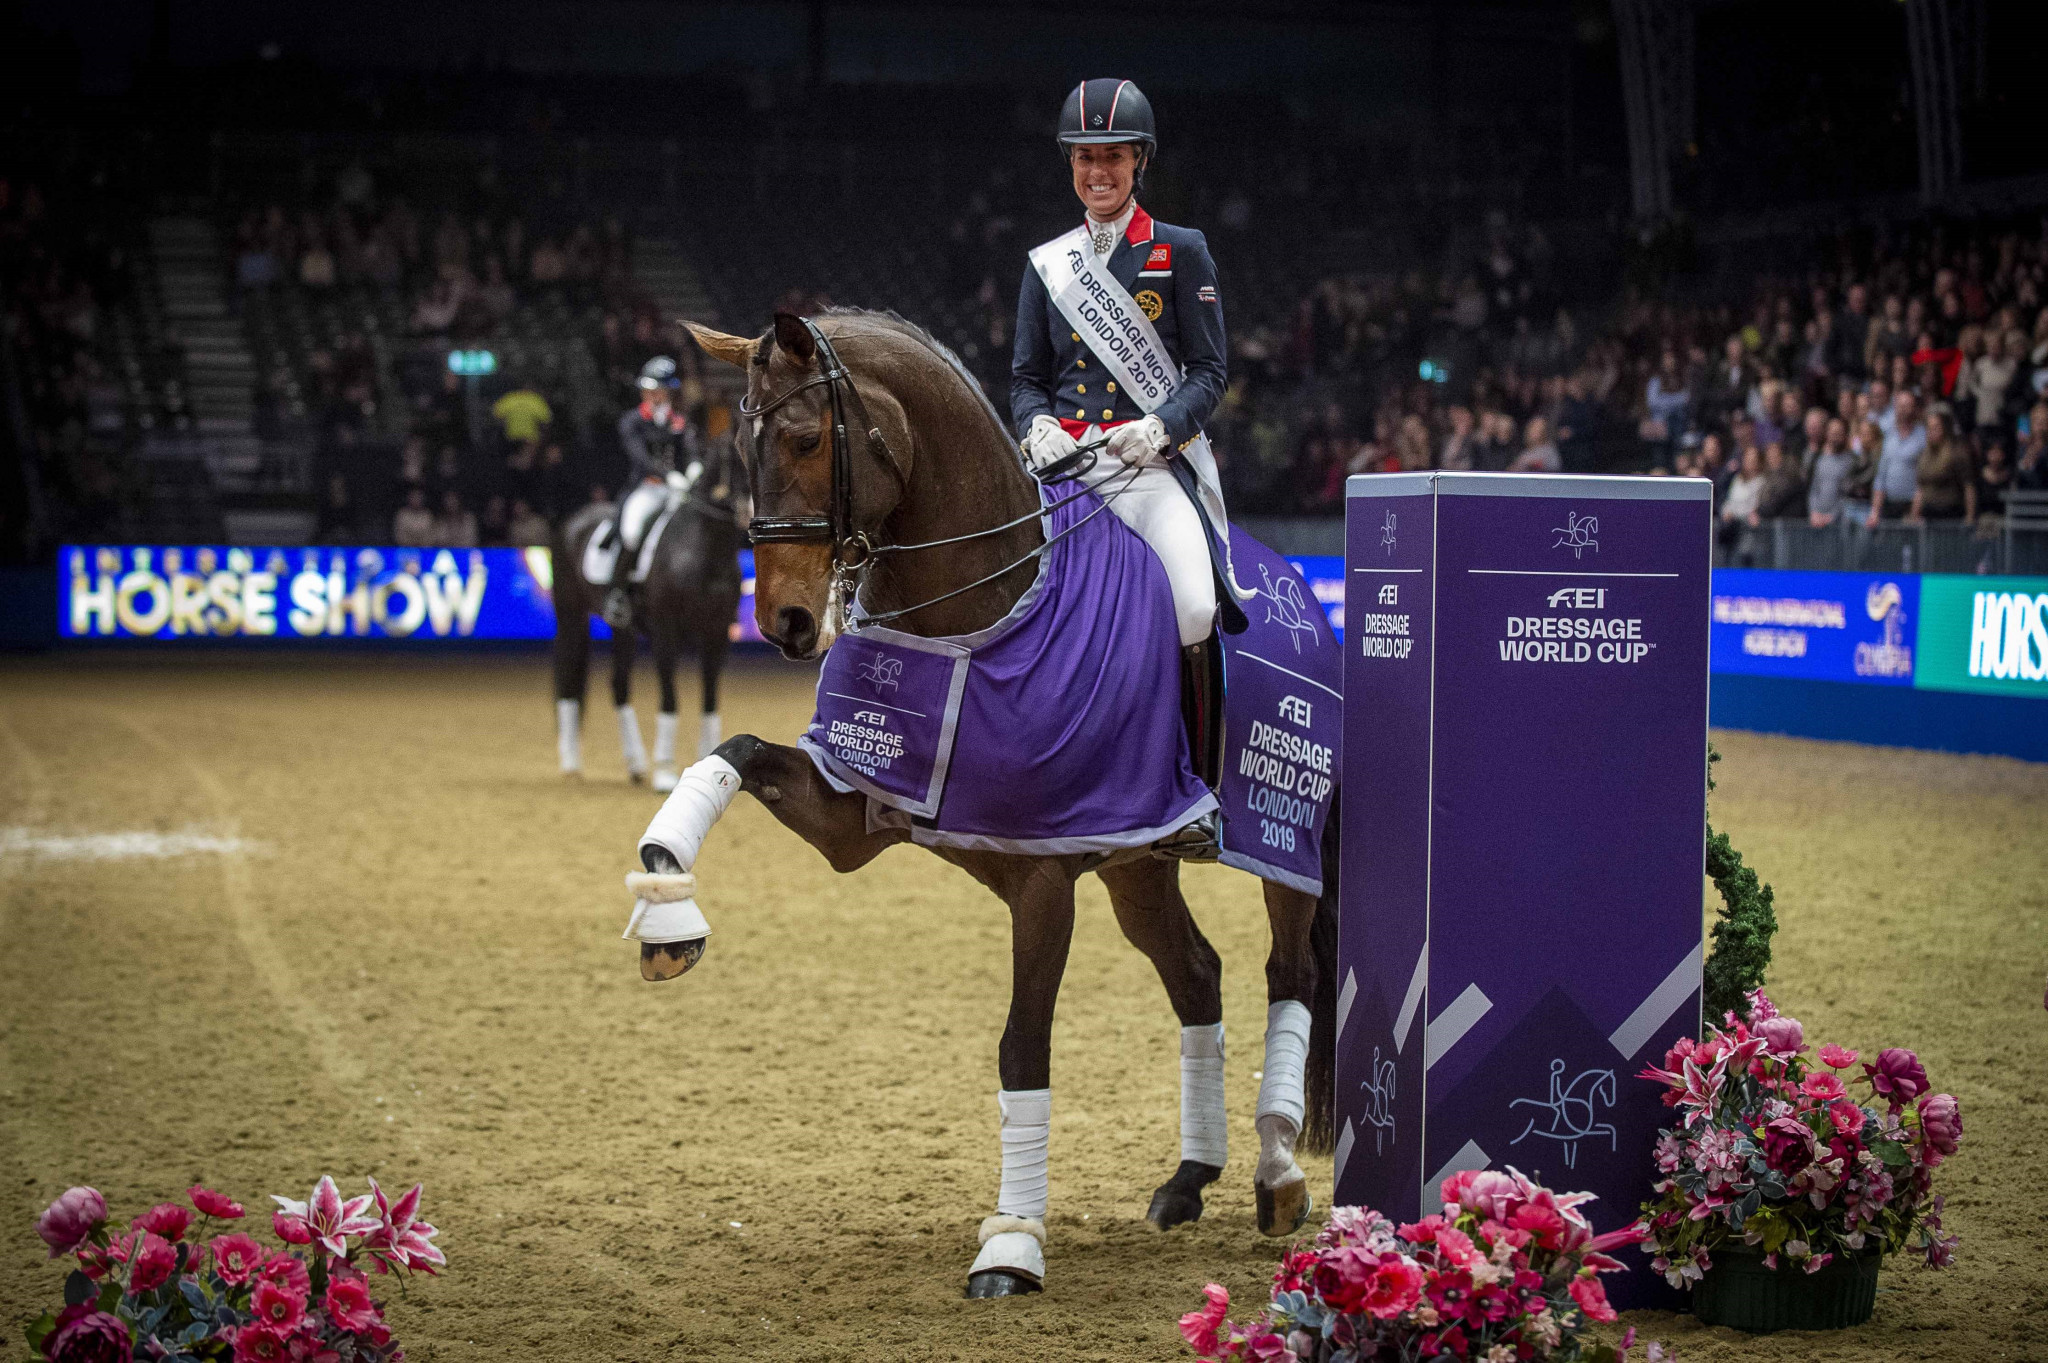 Dujardin delights home crowd as Britain dominate FEI Dressage World Cup in London